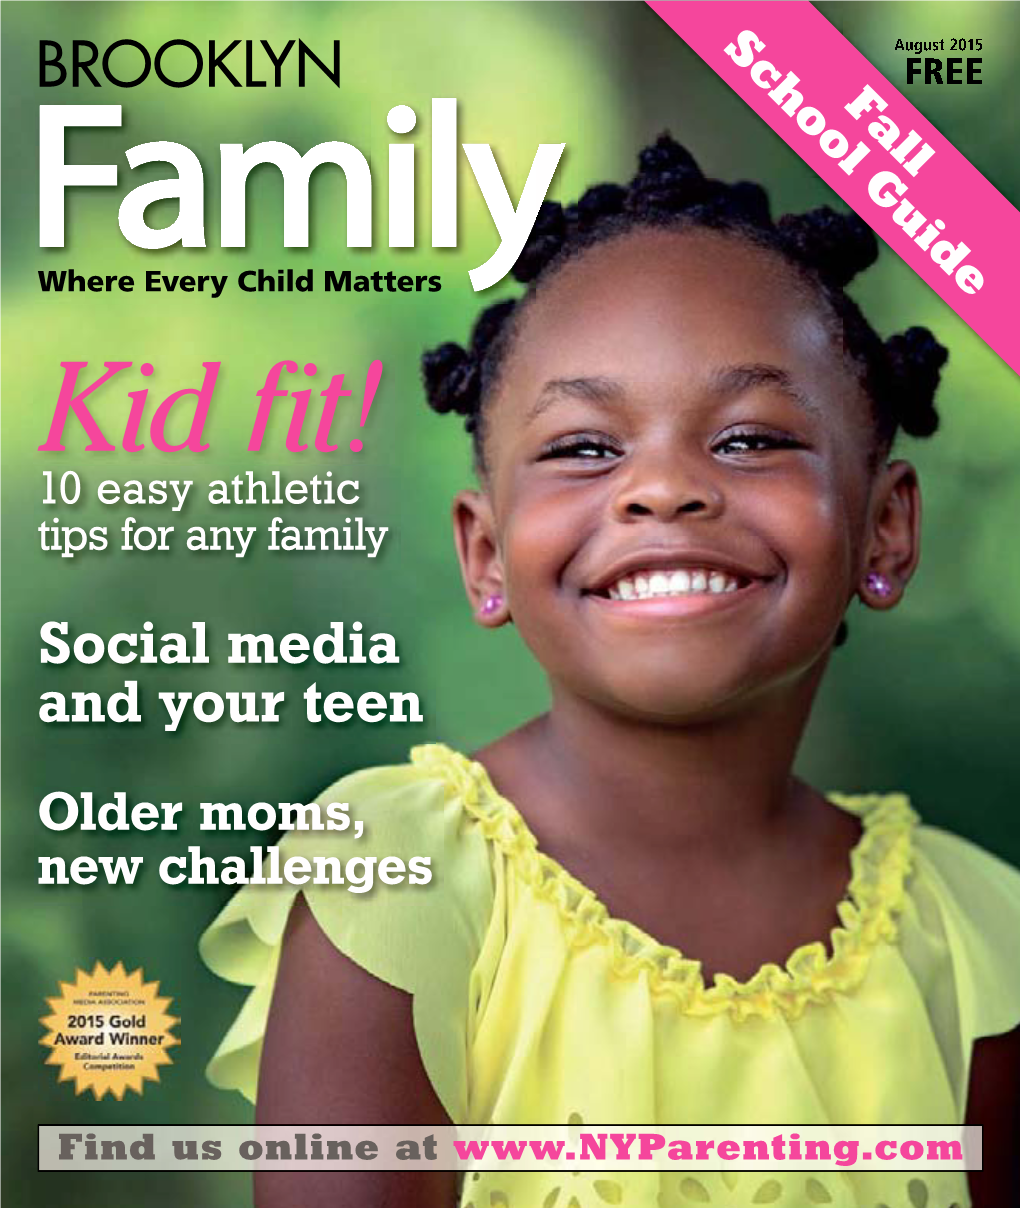 BROOKLYN FREE Family Fall Where Every Child Matters Kid Fit! 10 Easy Athletic Tips for Any Family Social Media and Your Teen Older Moms, New Challenges